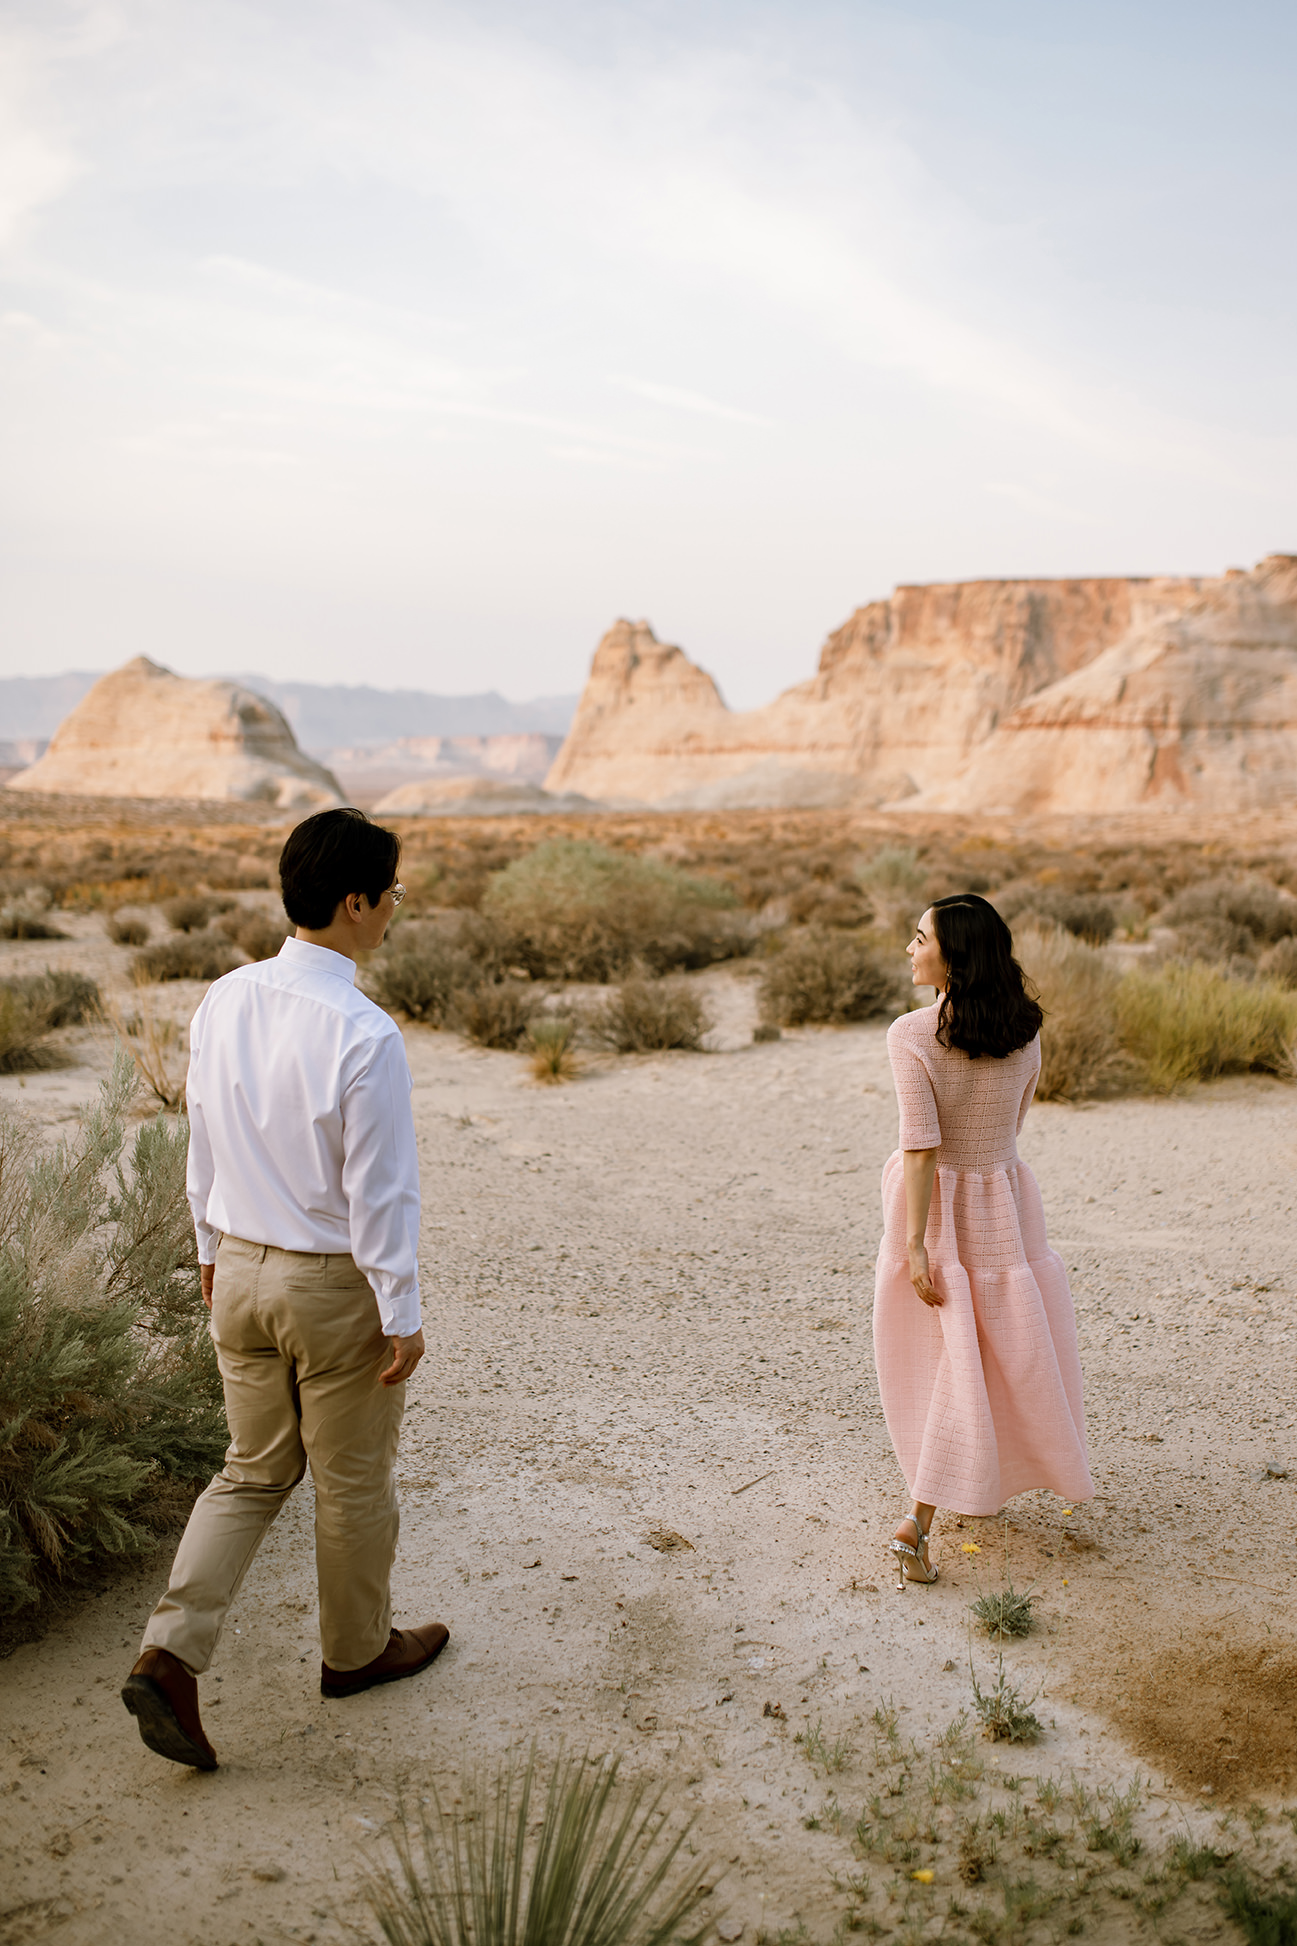 New wife in pink dress playfuly leads her husband through a small dessert clearing.